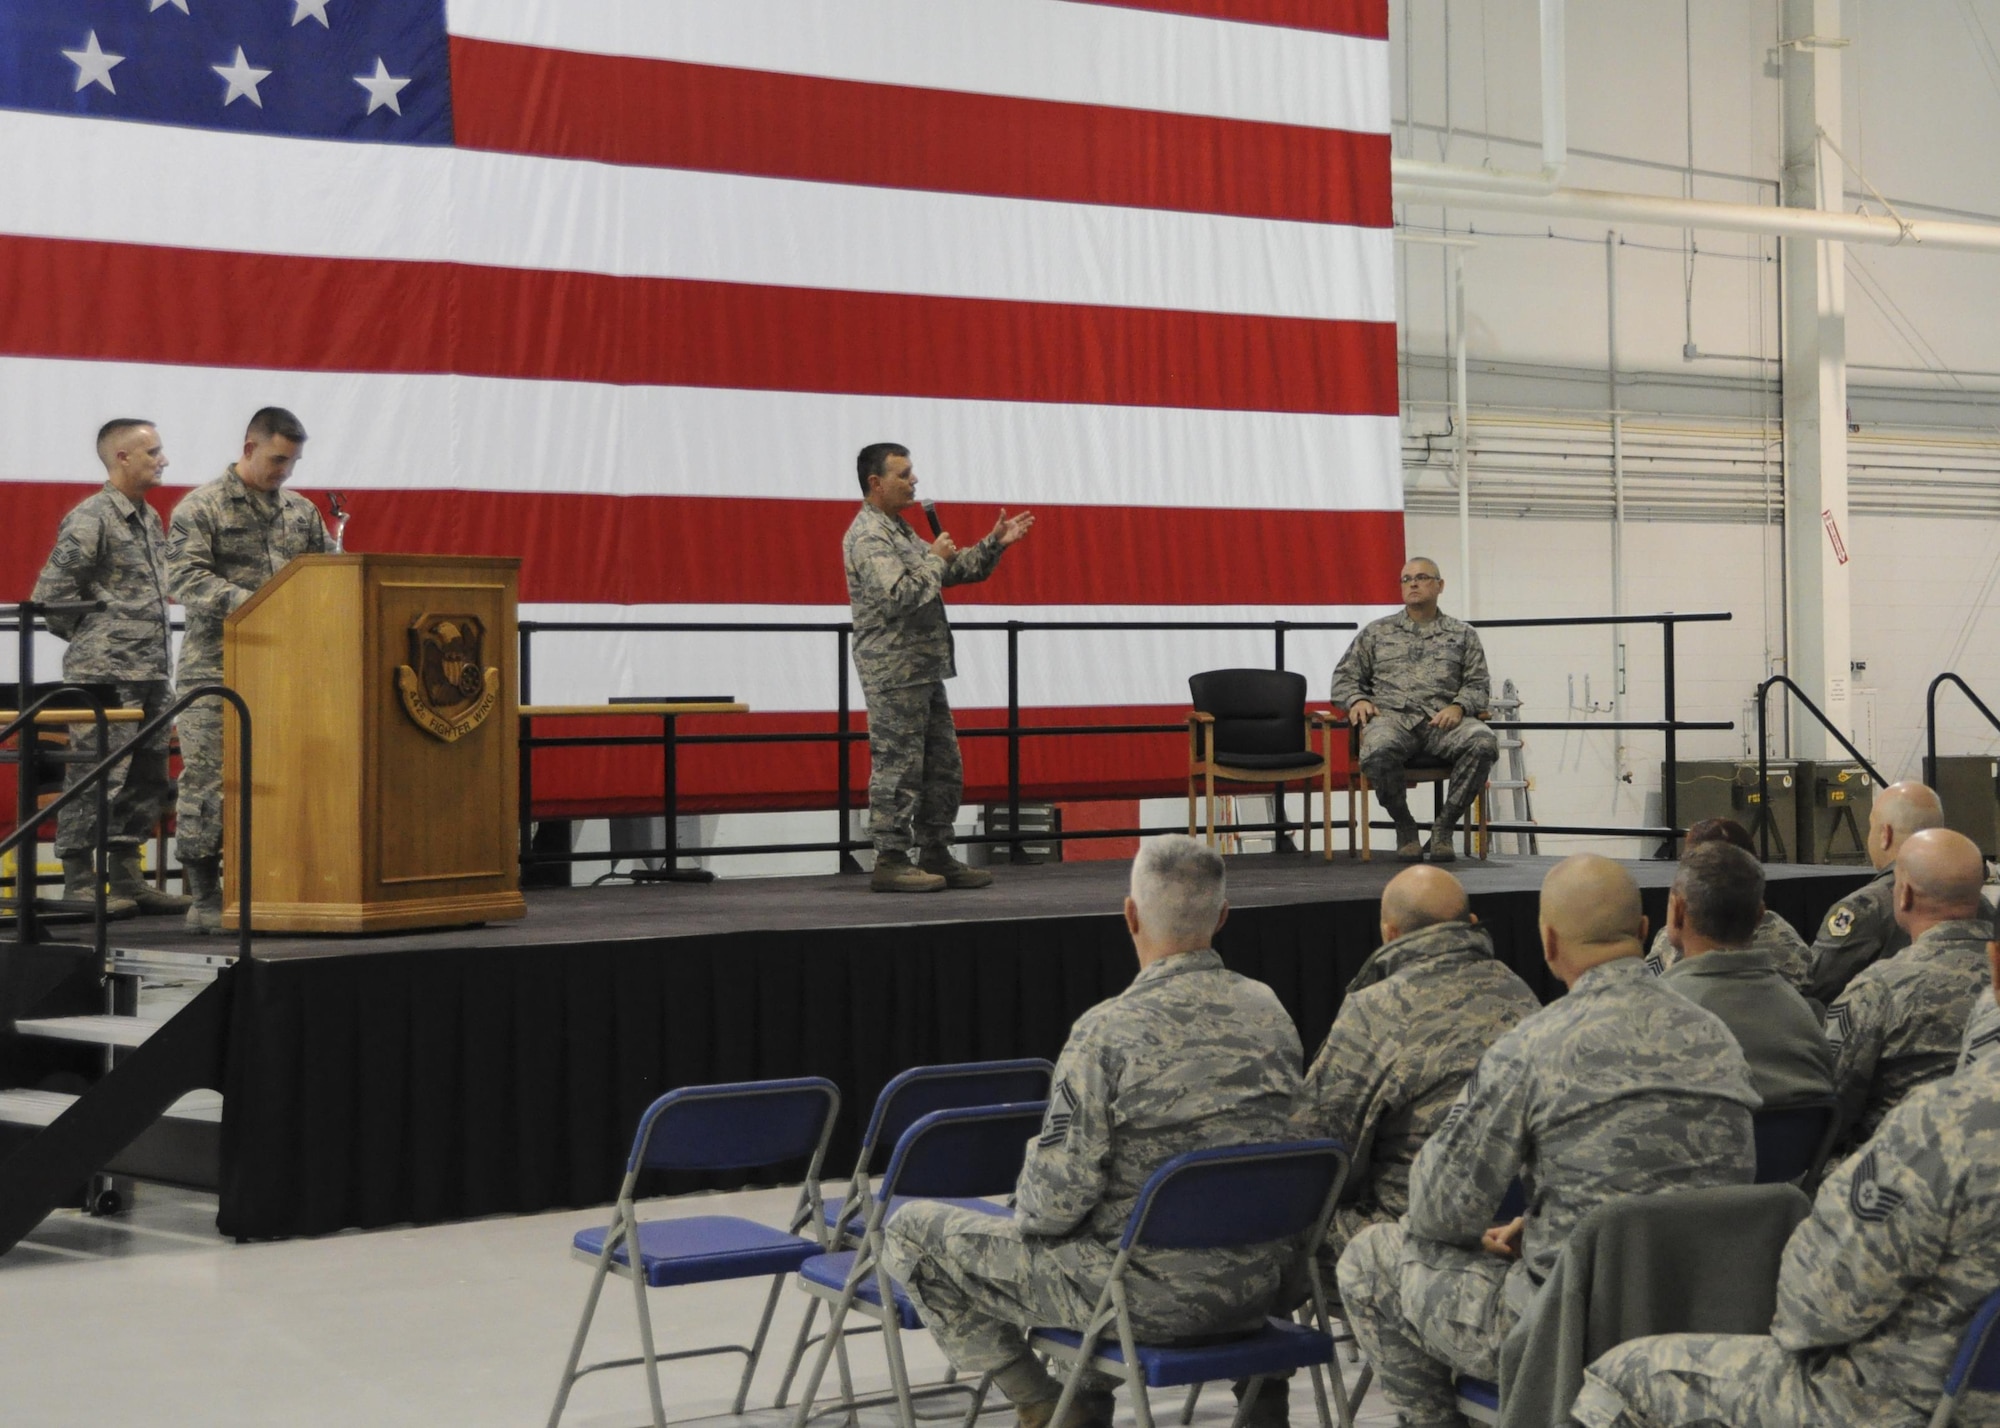 U.S. Air Force Col. James Brock, 442d Maintenance Group commander, addresses the men and women of the 442d Fighter Wing during the non-commissioned officer and senior NCO induction ceremony at Whiteman Air Force Base, Missouri, Jan. 7, 2017. Brock congratulated the incoming NCOs and SNCOs on their promotions and thanked them for their dedication to the unit. (U.S. Air Force photo/Senior Airman Missy Sterling)